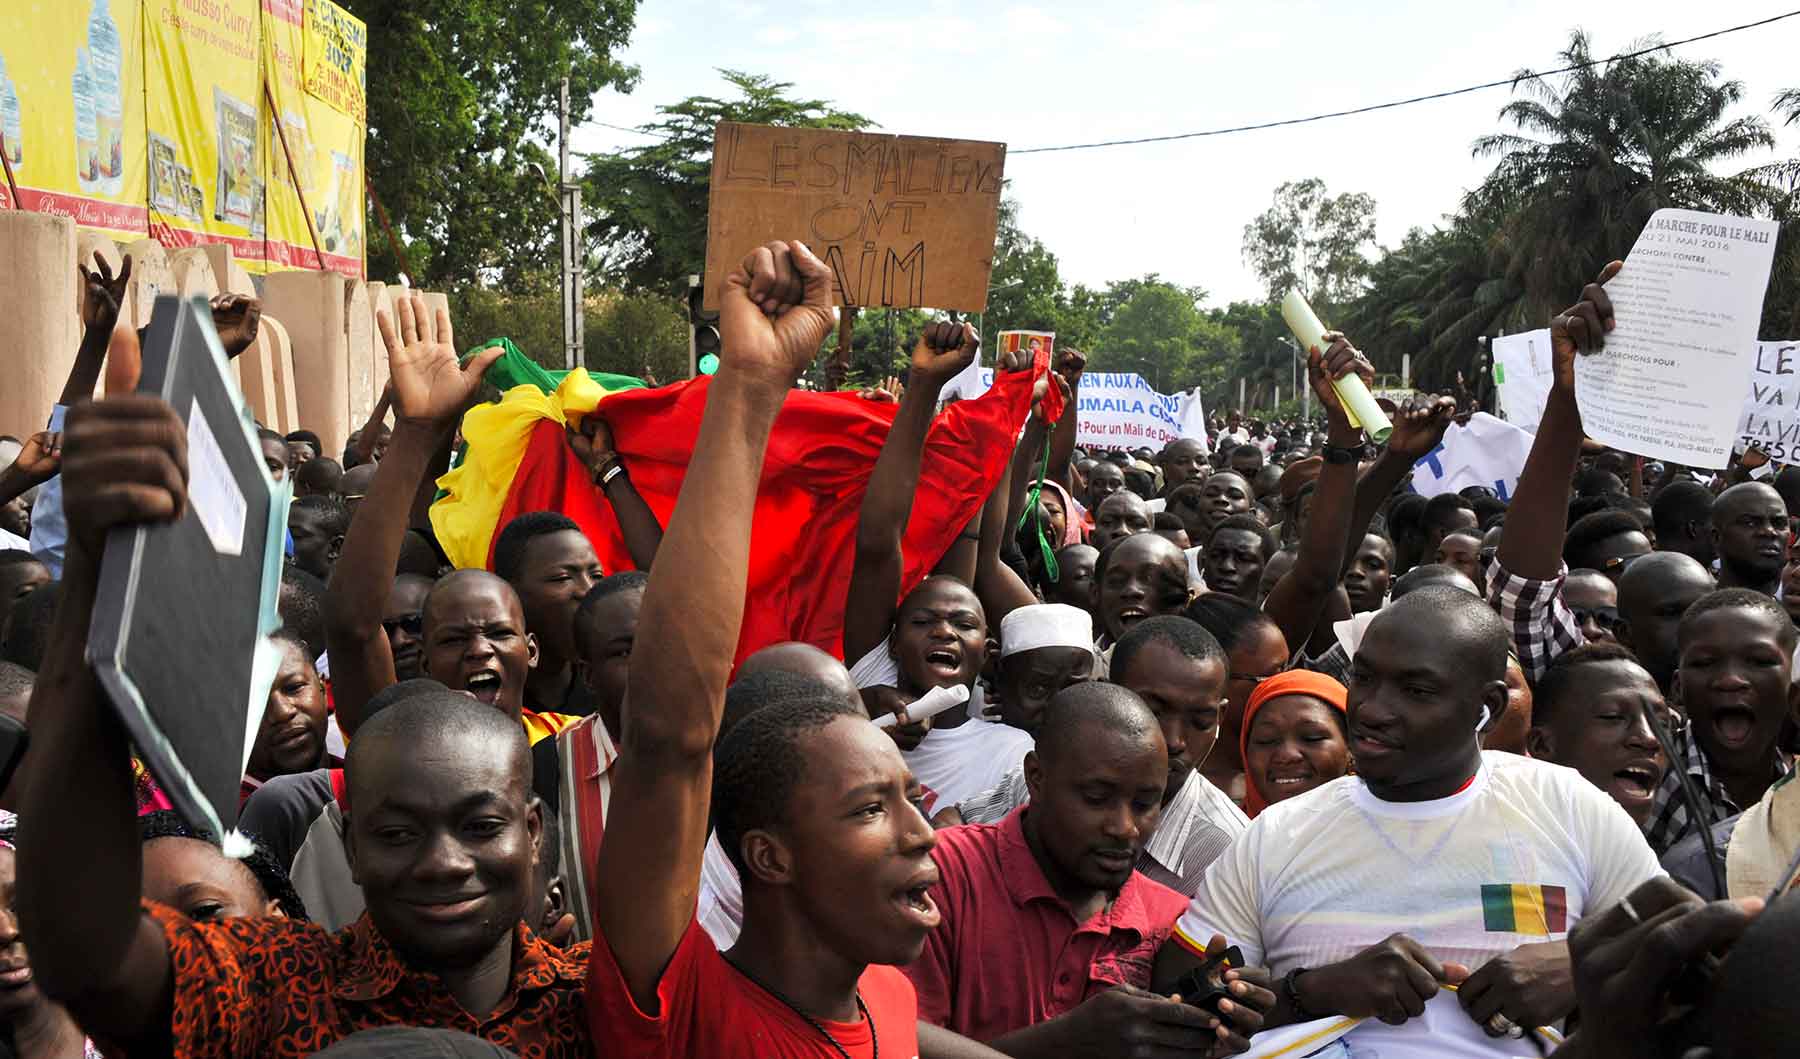 Malian Opposition supporters take part in a peacefully march